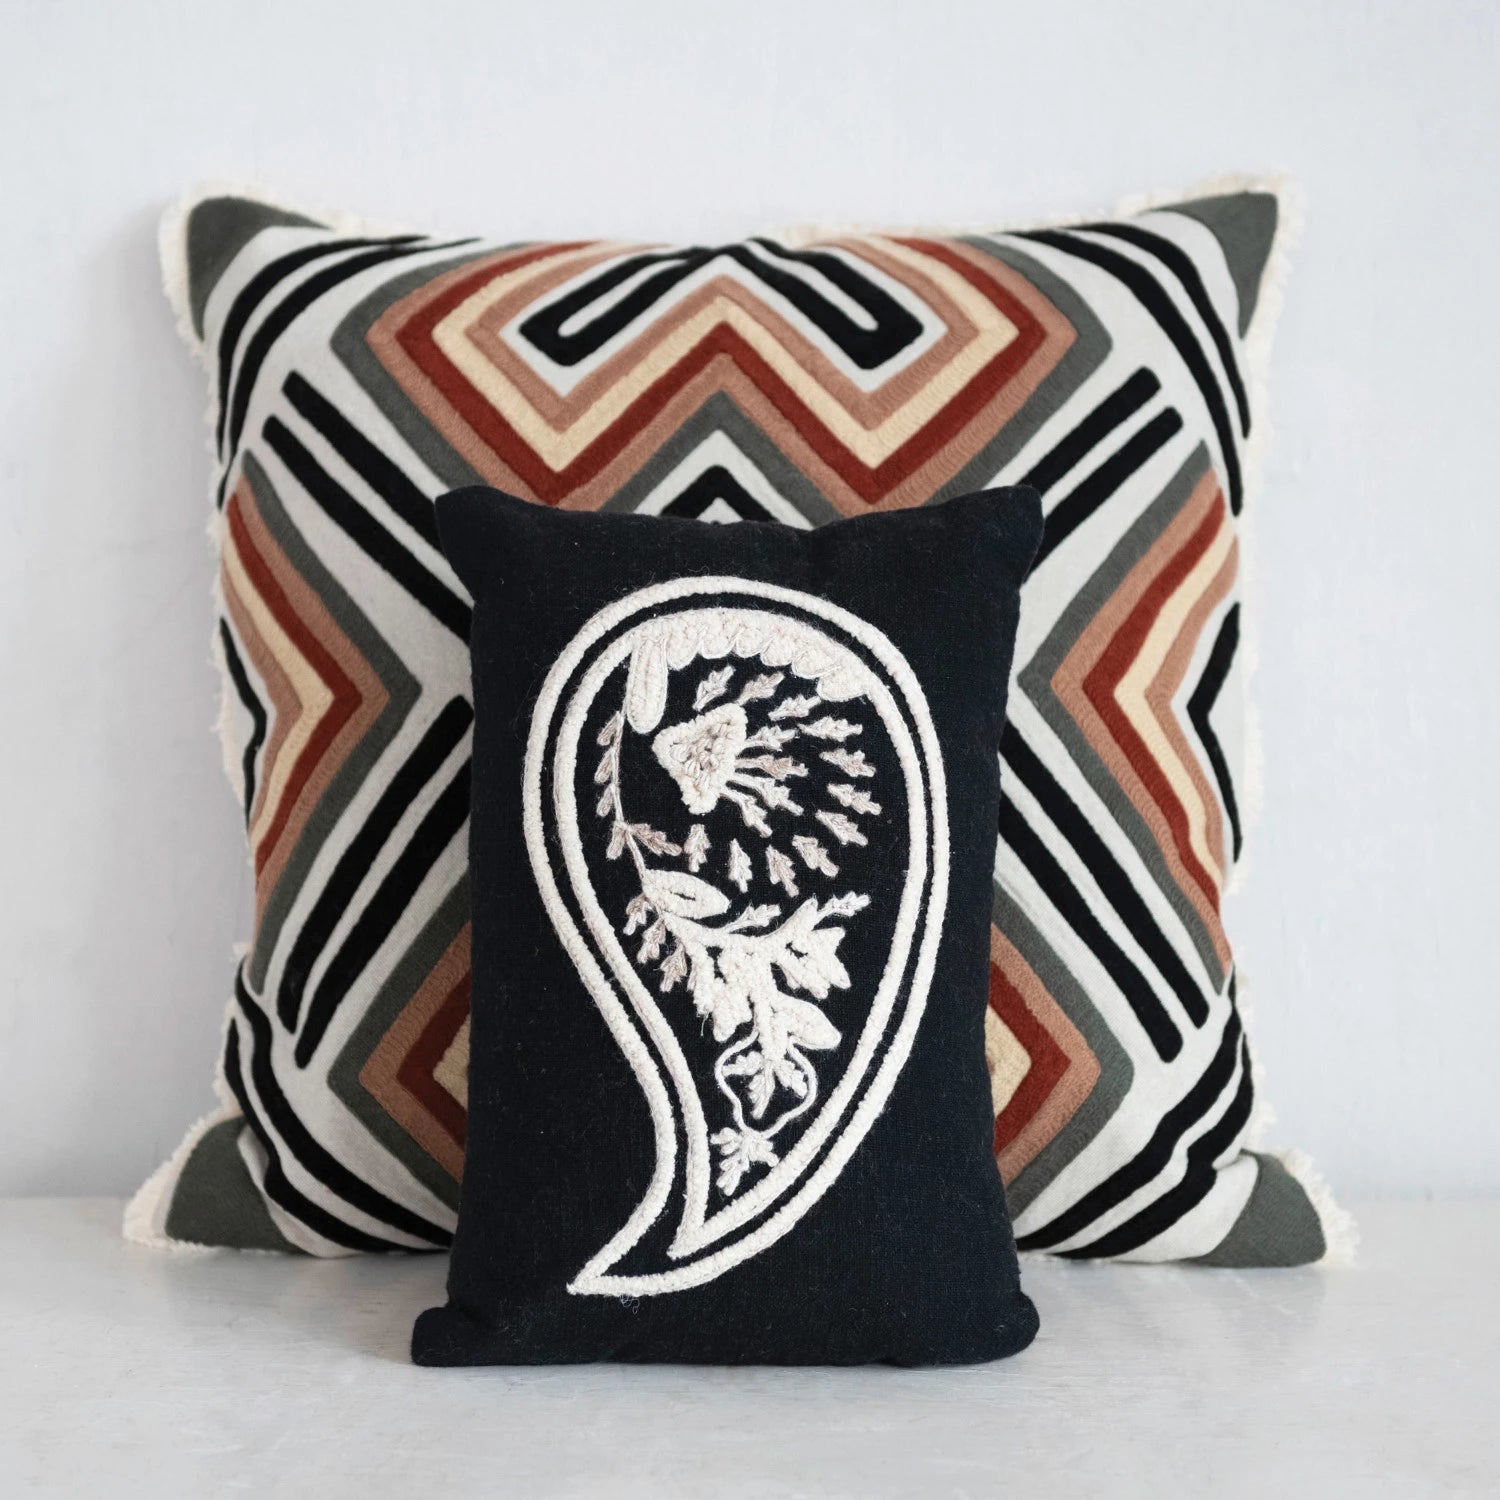 Cotton Embroidered Pillow w/ Pattern & Fringe